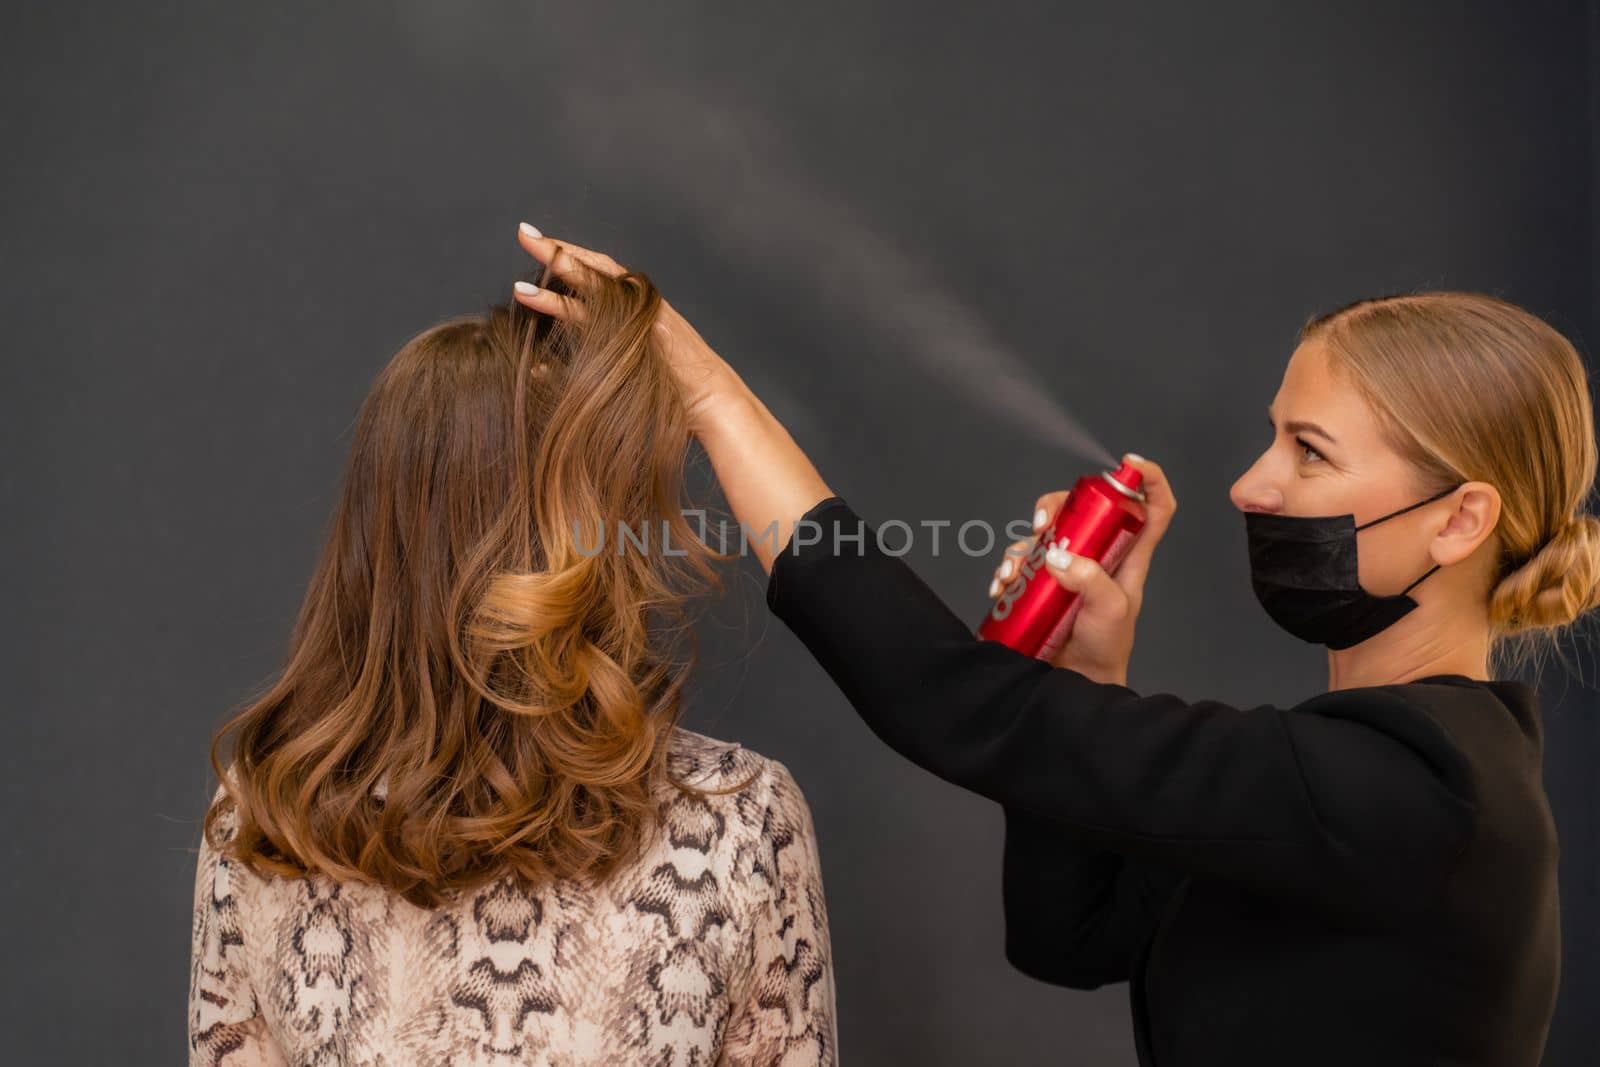 Women salon hairstyle. Hairdresser uses hairspray on client's hair in salon, Portrait of two beautiful women.